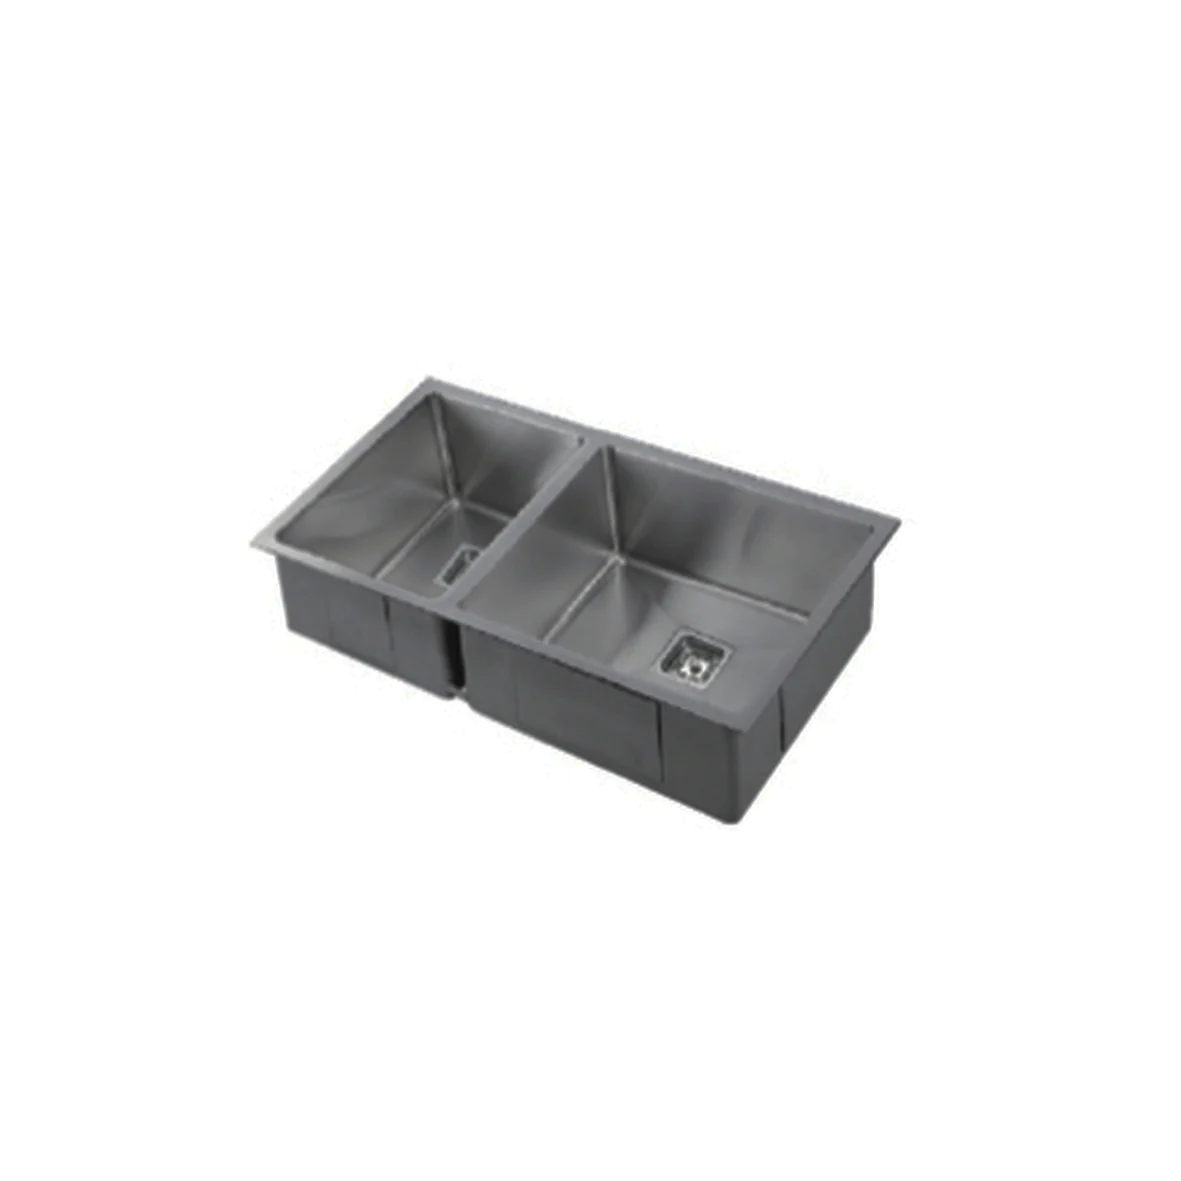 VEROTTI INOX 1 1/2 BOWL UNIVERSAL STAINLESS STEEL KITCHEN SINK GUN METAL 670MM (AVAILABLE IN LEFT OR RIGHT CONFIGURATION)